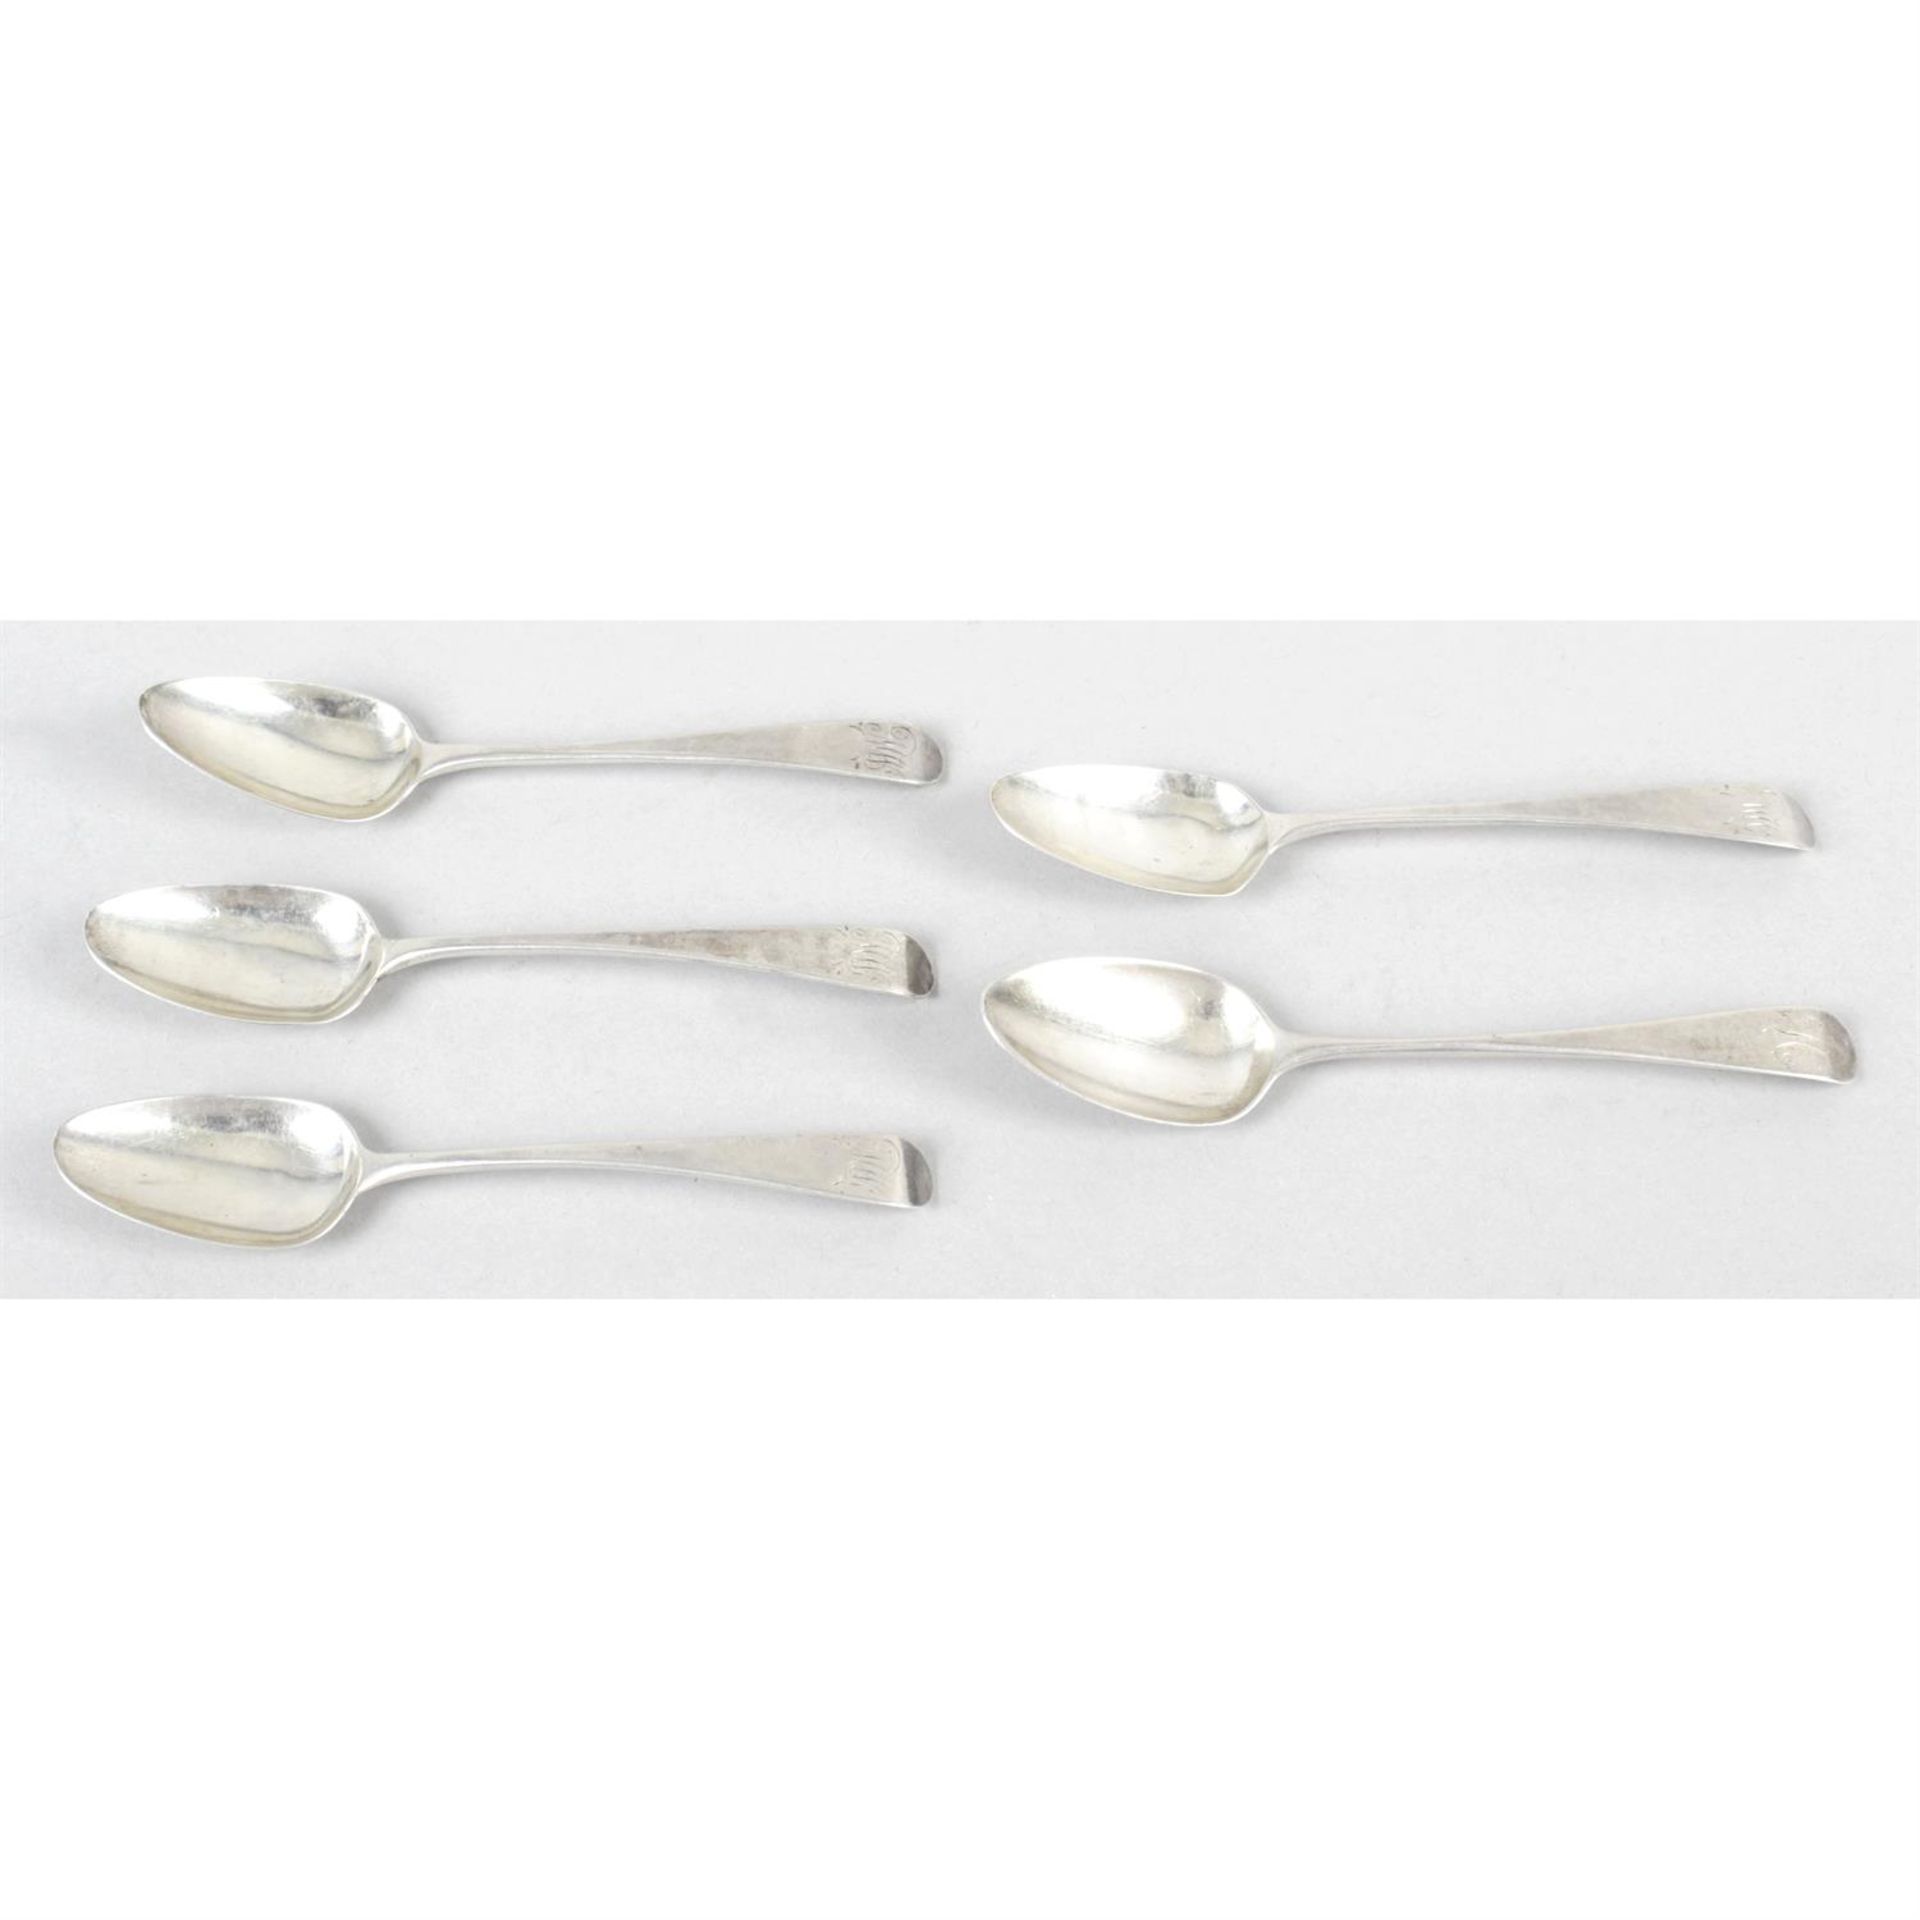 Five George III silver Old English pattern teaspoons, together with a set of six Edwardian silver